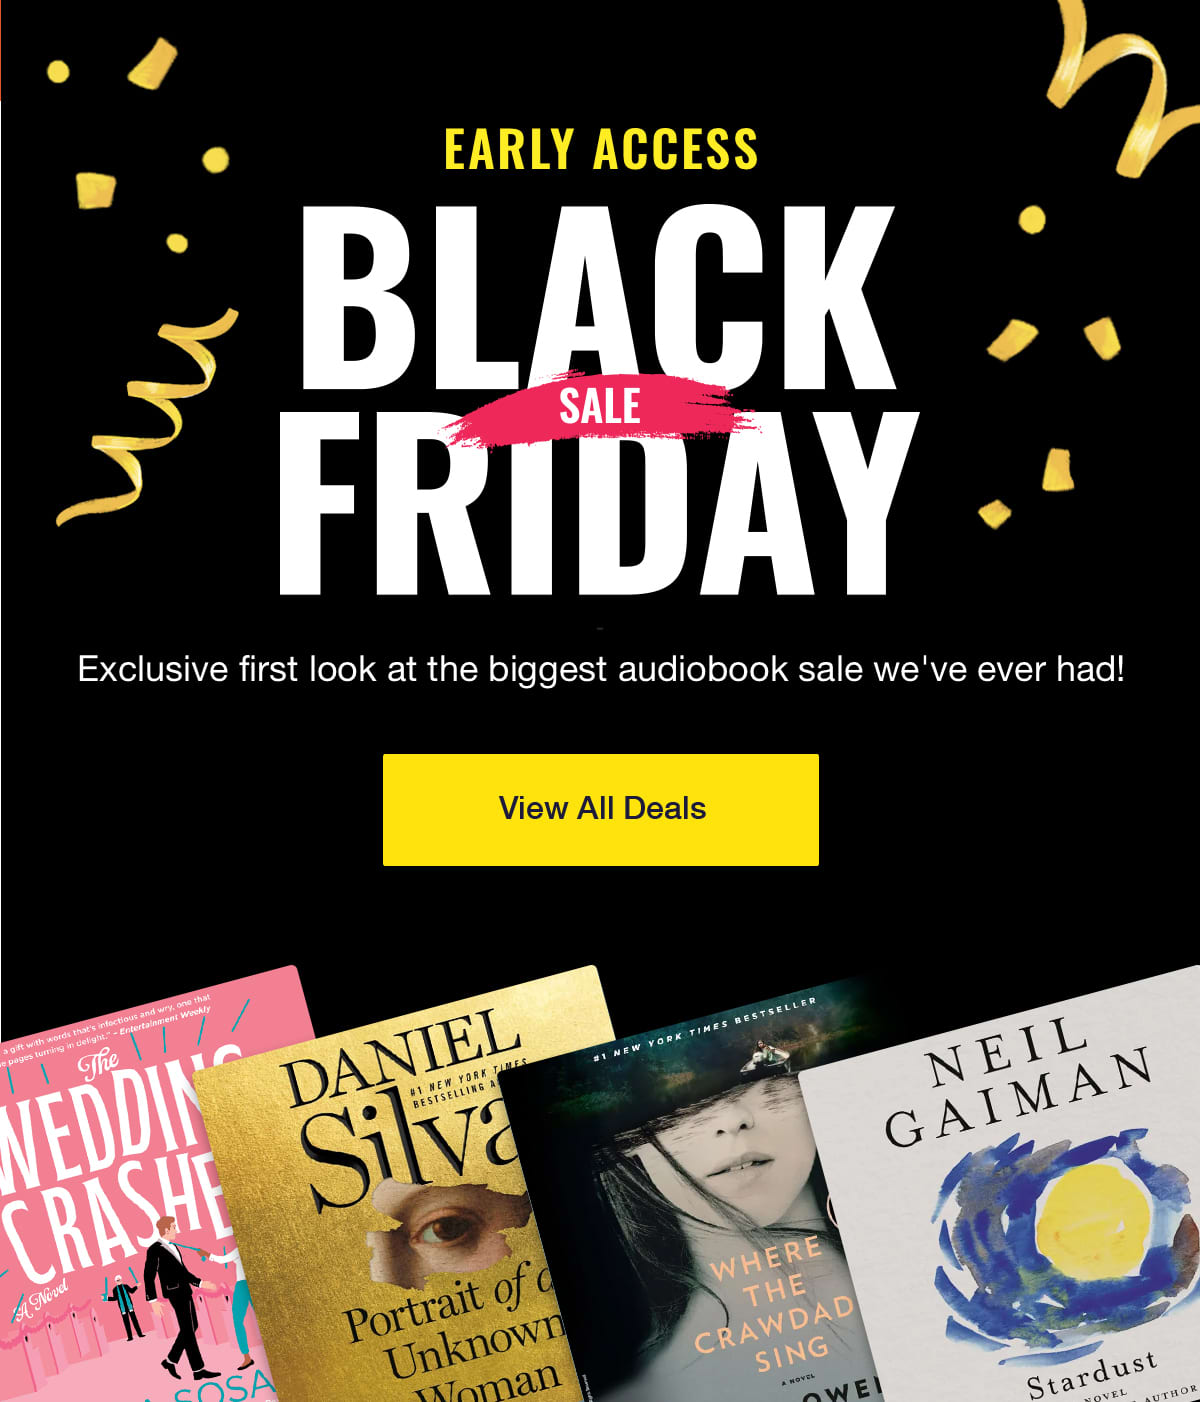 Early Access Black Friday Sale: Exclusive first look at the biggest audiobook sale we've ever had! Click to view all deals